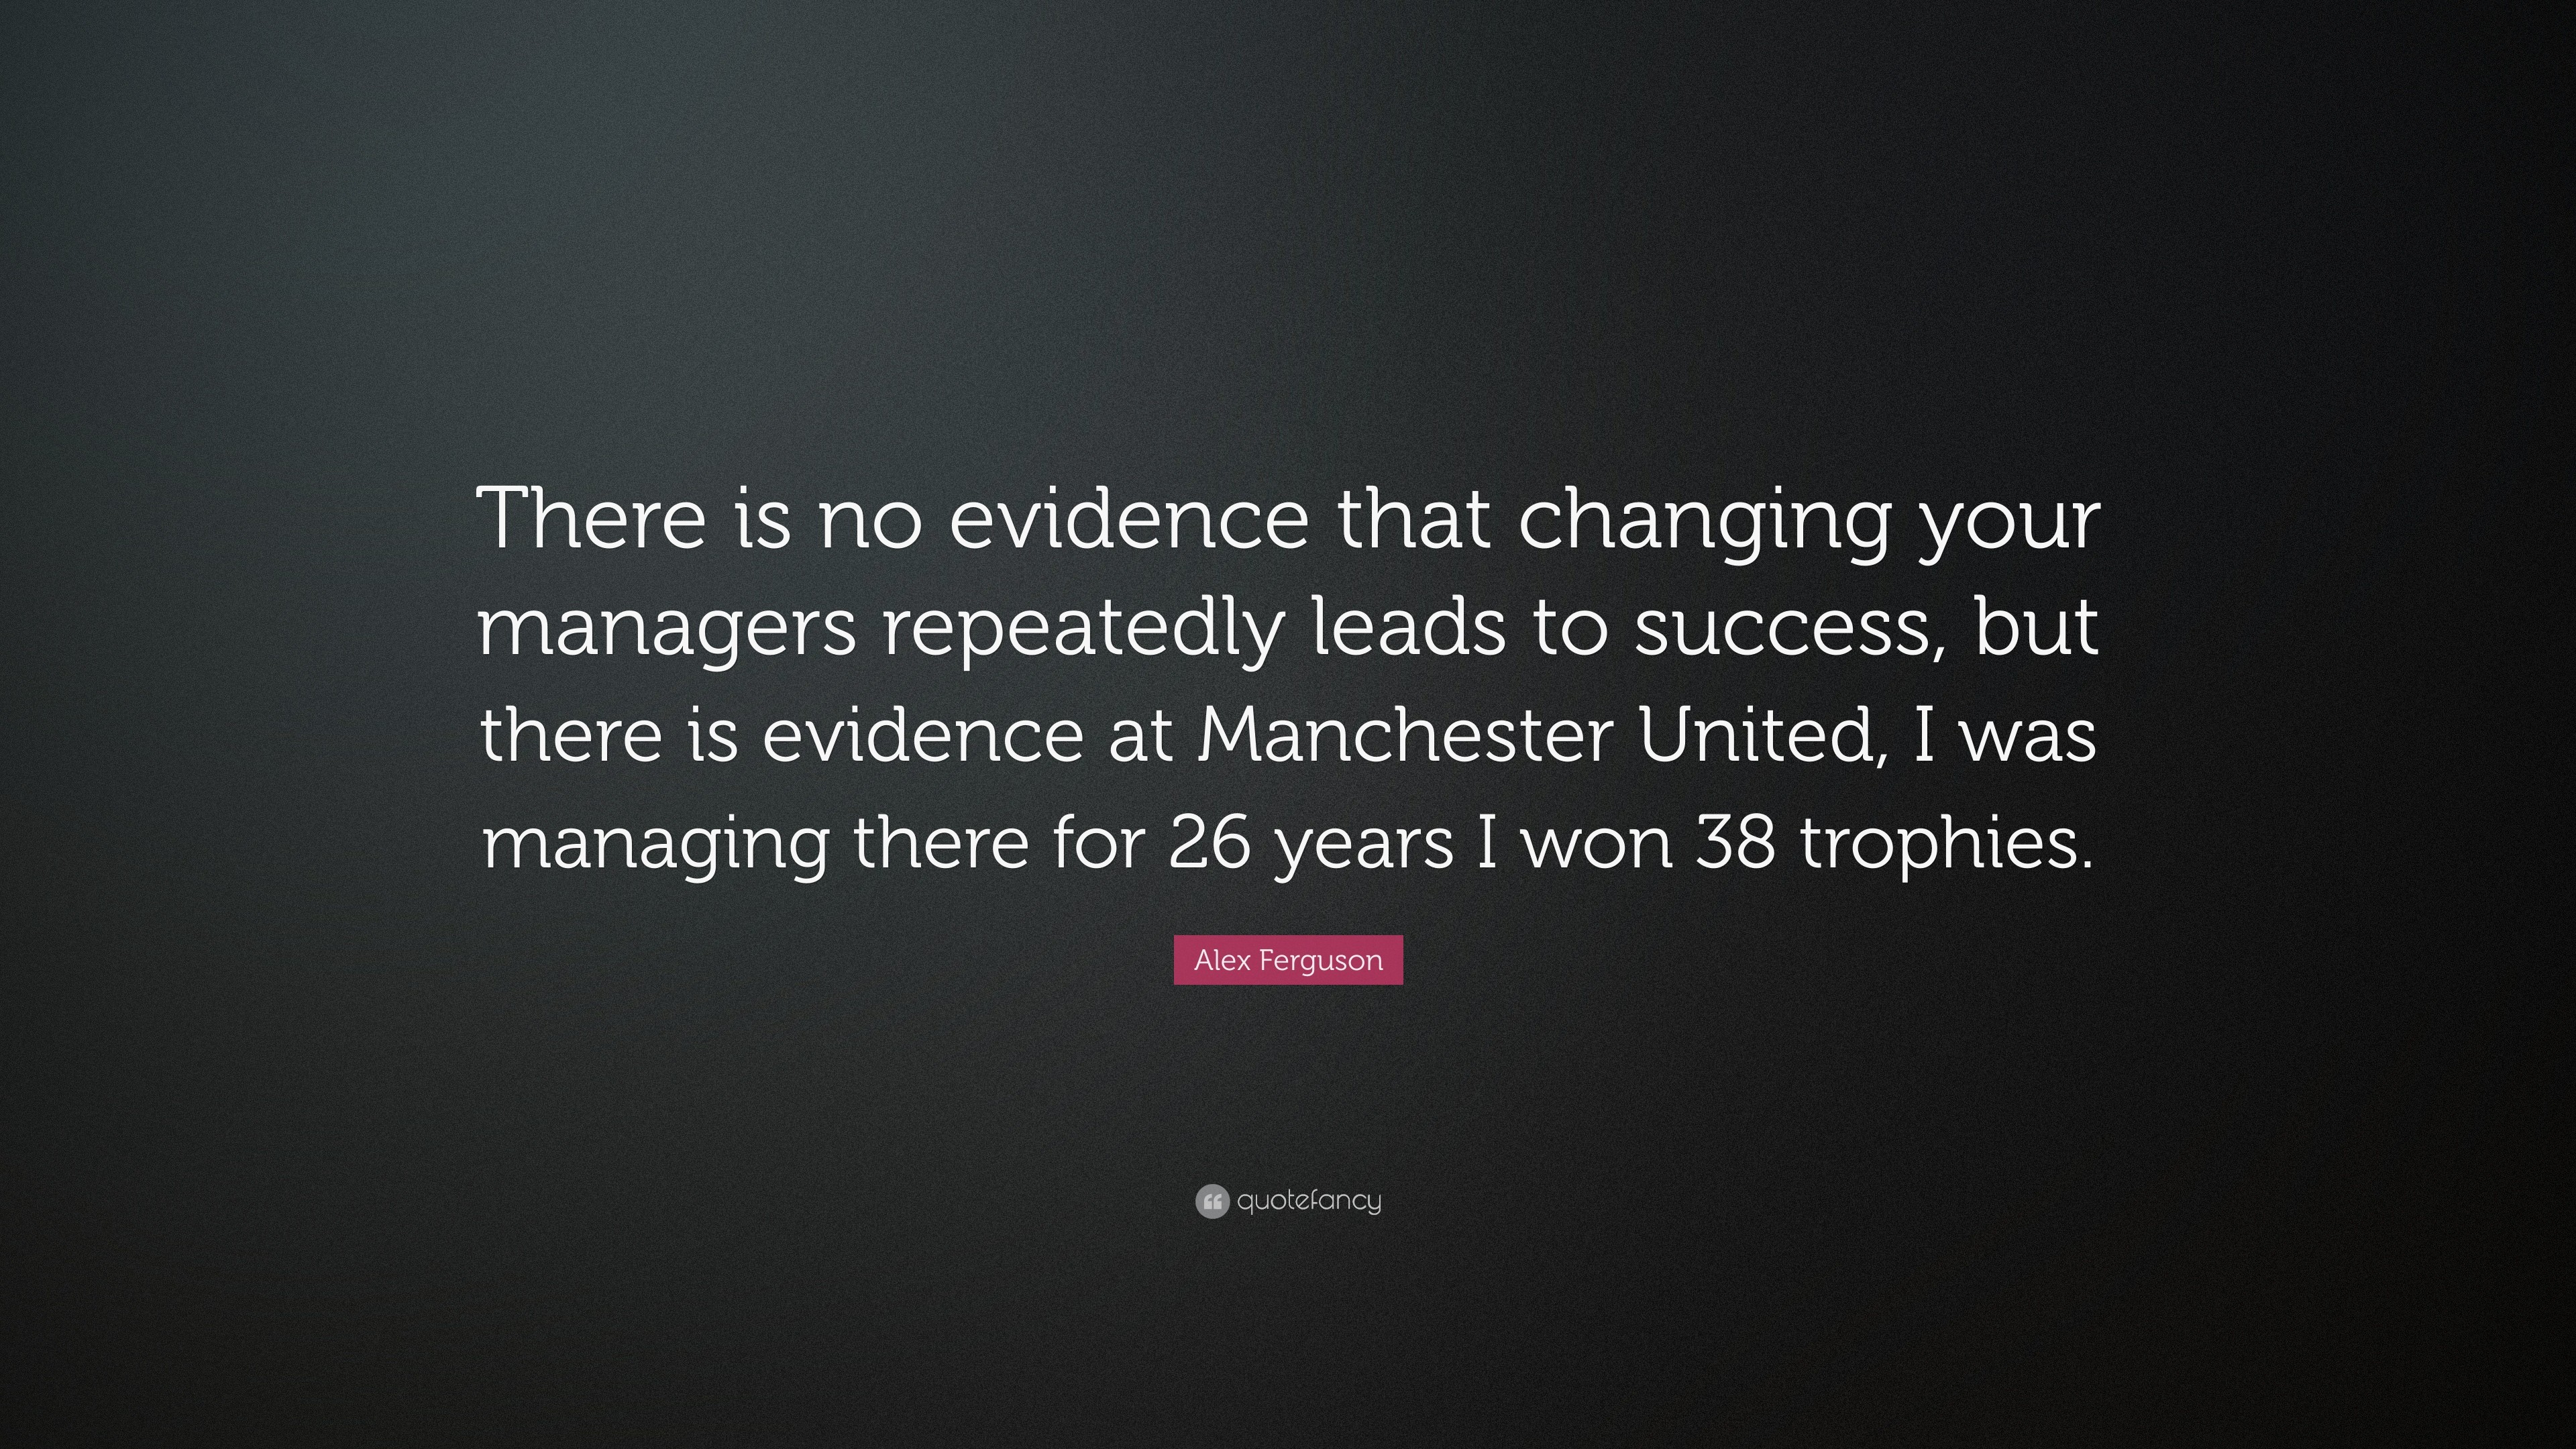 3840x2160 Alex Ferguson Quote: “There is no evidence that changing your managers  repeatedly leads to